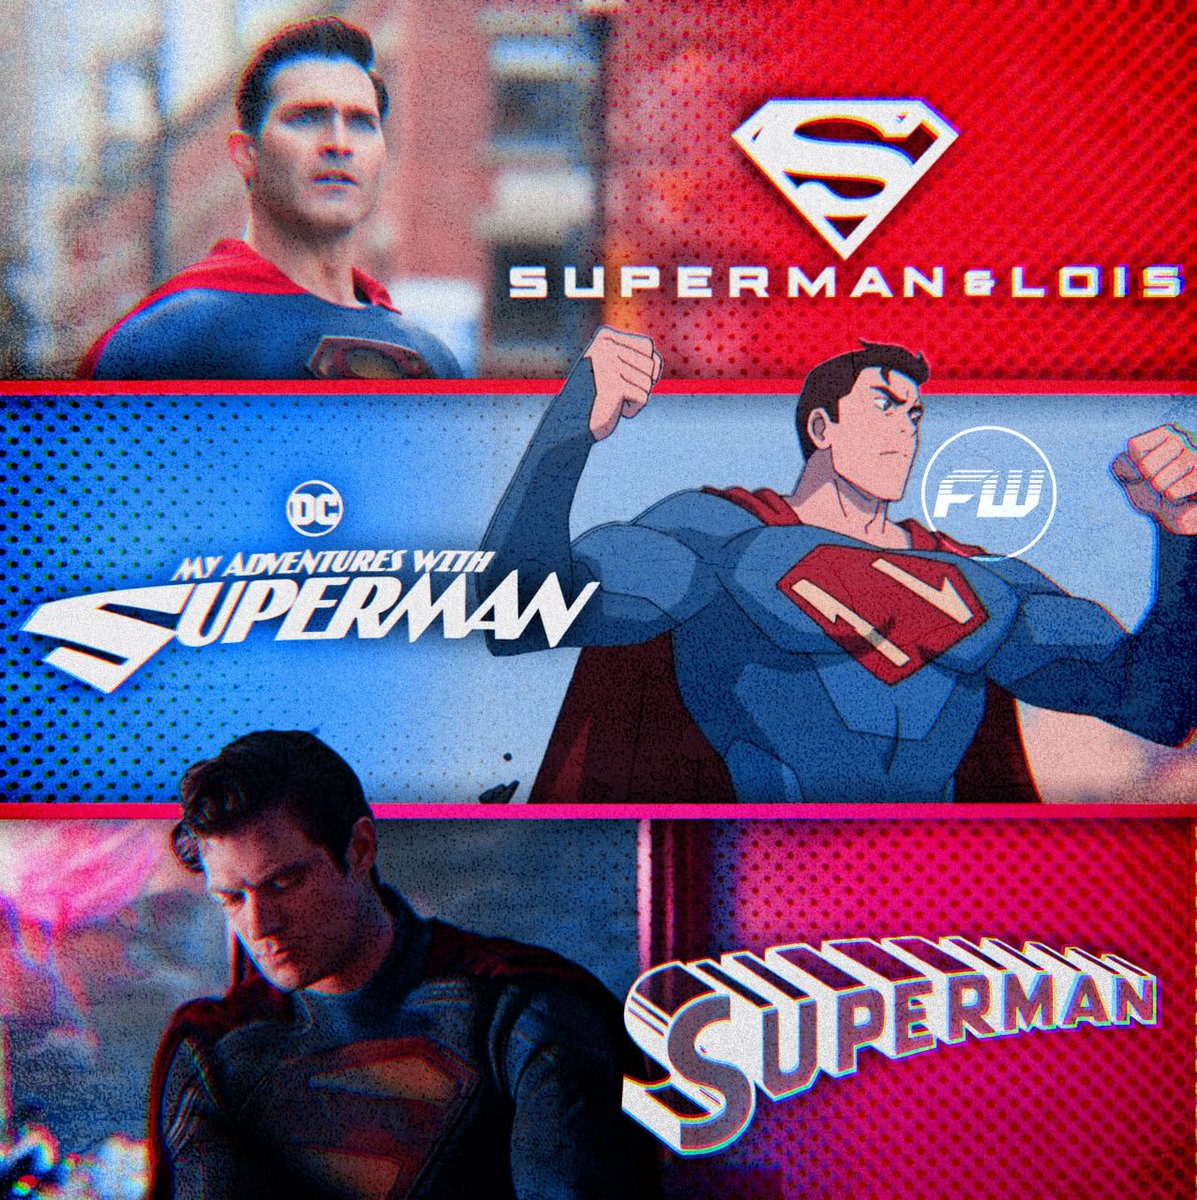 Upcoming Superman projects 🦸‍♂️ Which one are you most excited about?